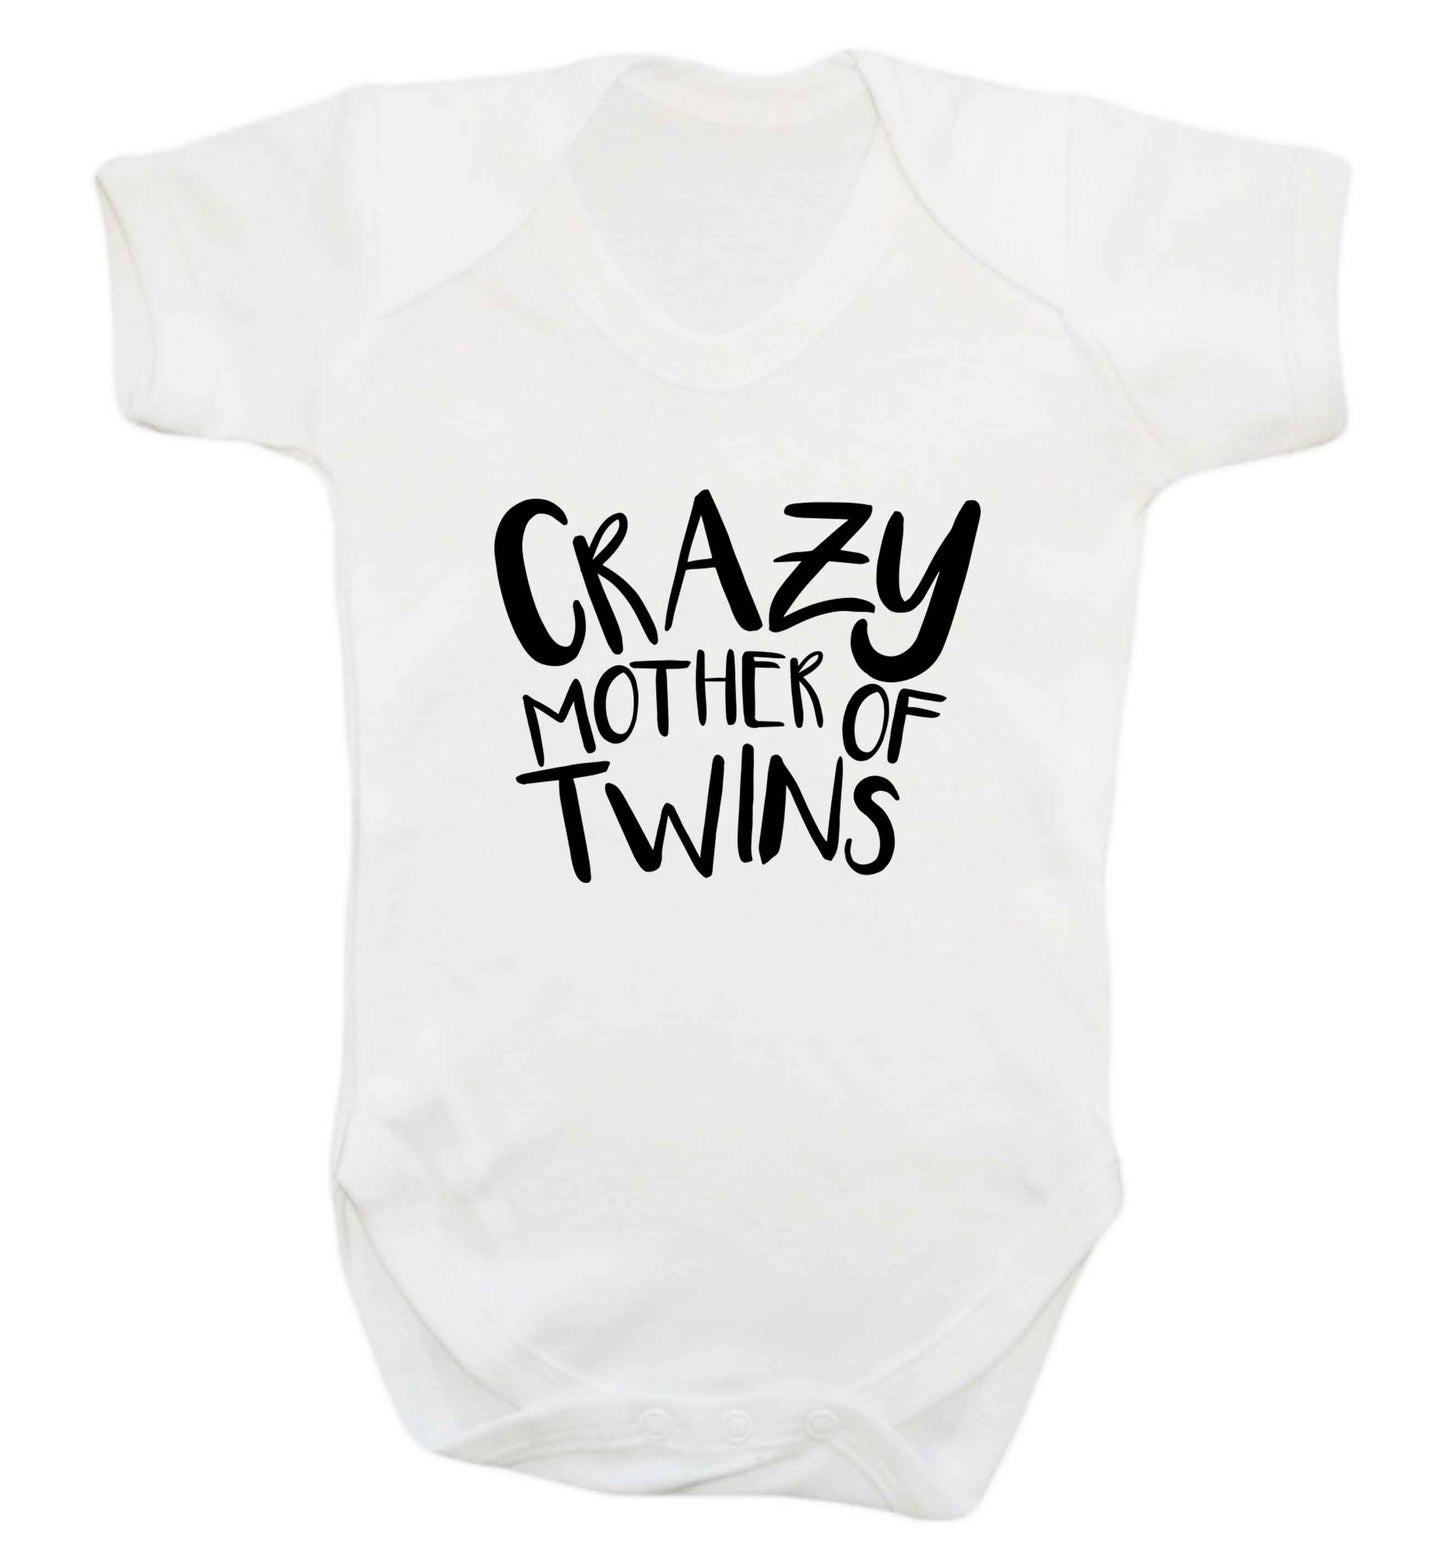 Crazy mother of twins baby vest white 18-24 months